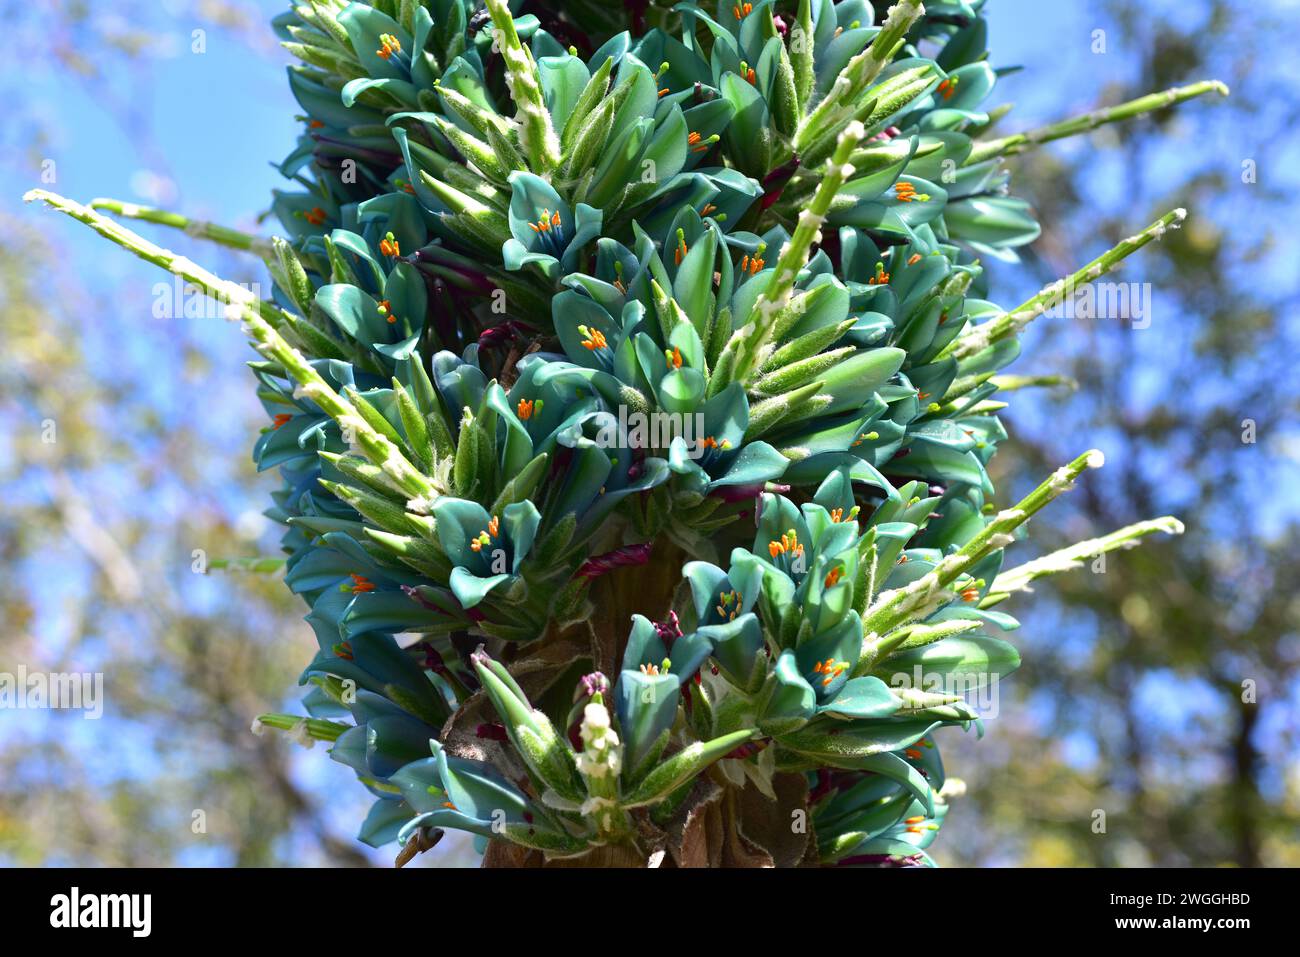 Chagual (Puya berteroniana or Puya alpestris) is a perennial plant endemic to Chile. Inflorescence detail. Stock Photo